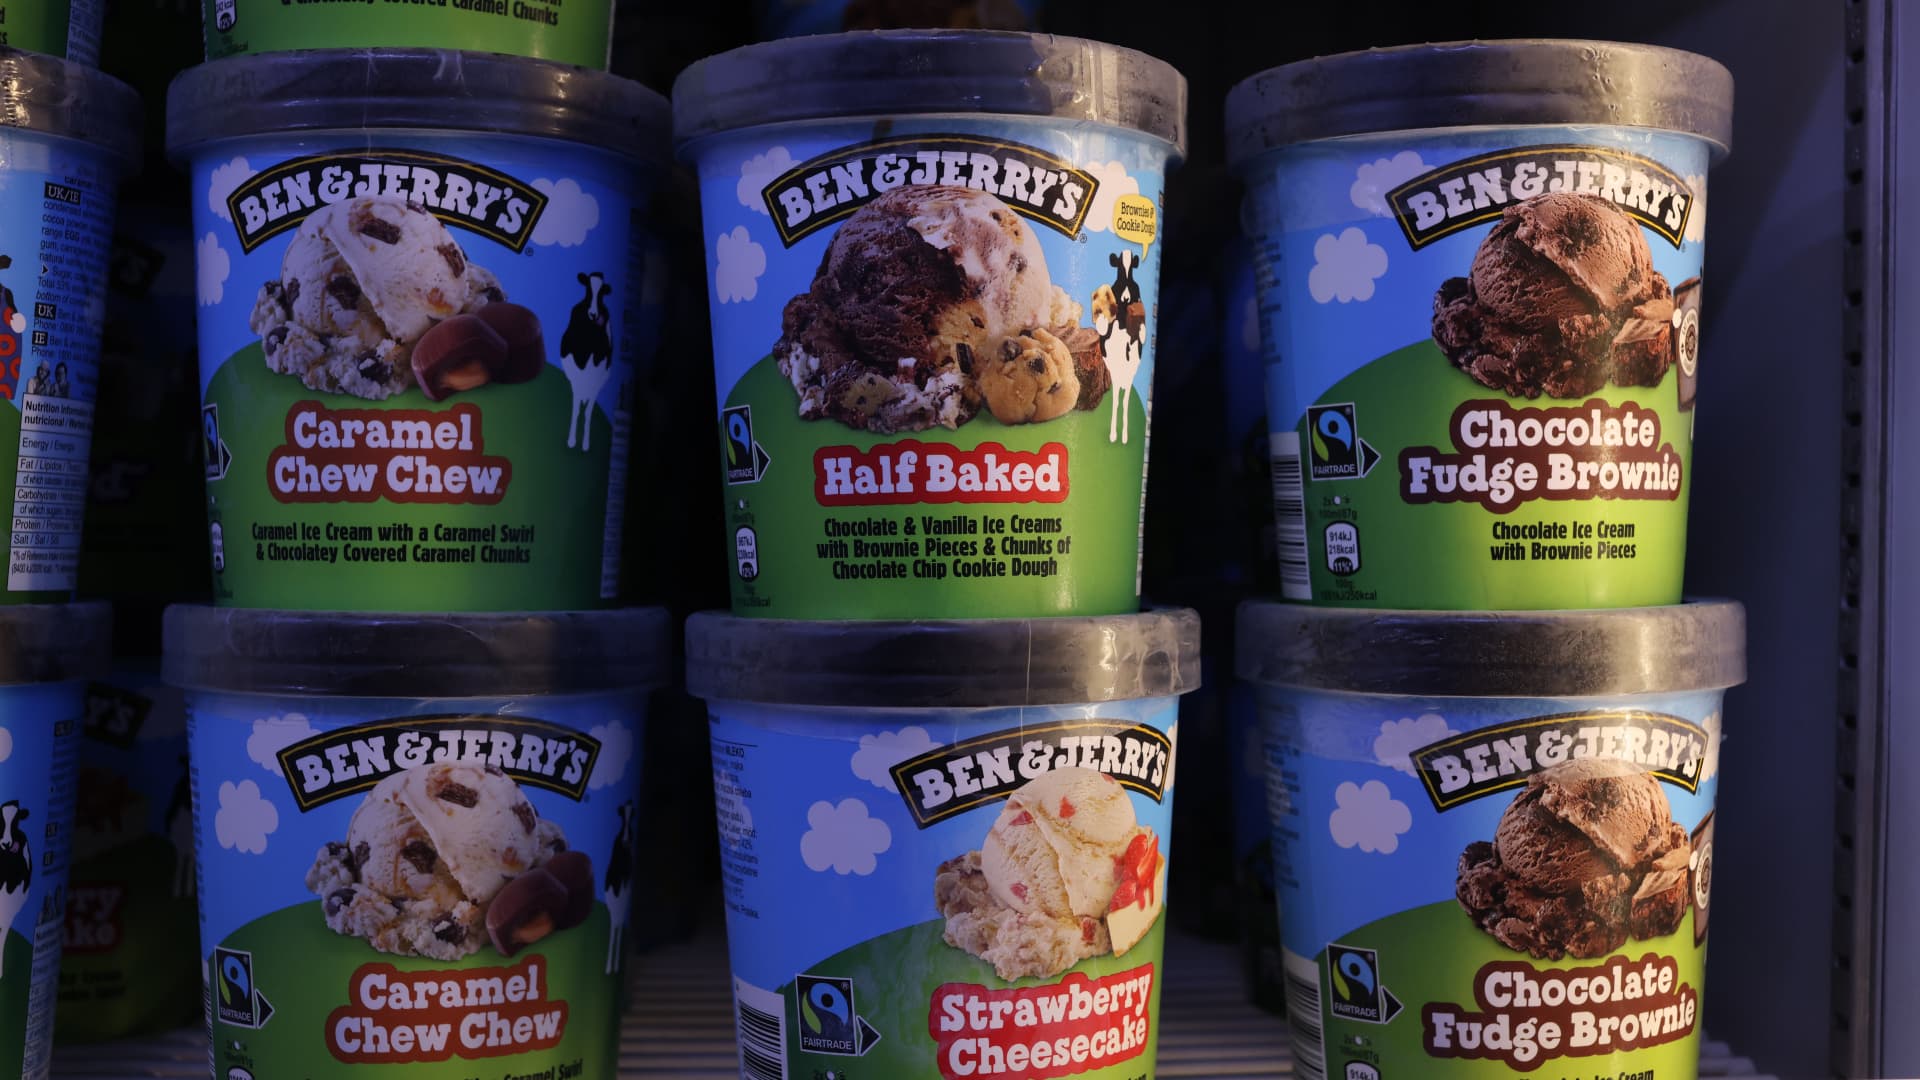 Unilever rises 6% after raising forecast, says Ben & Jerry's spin-off on track